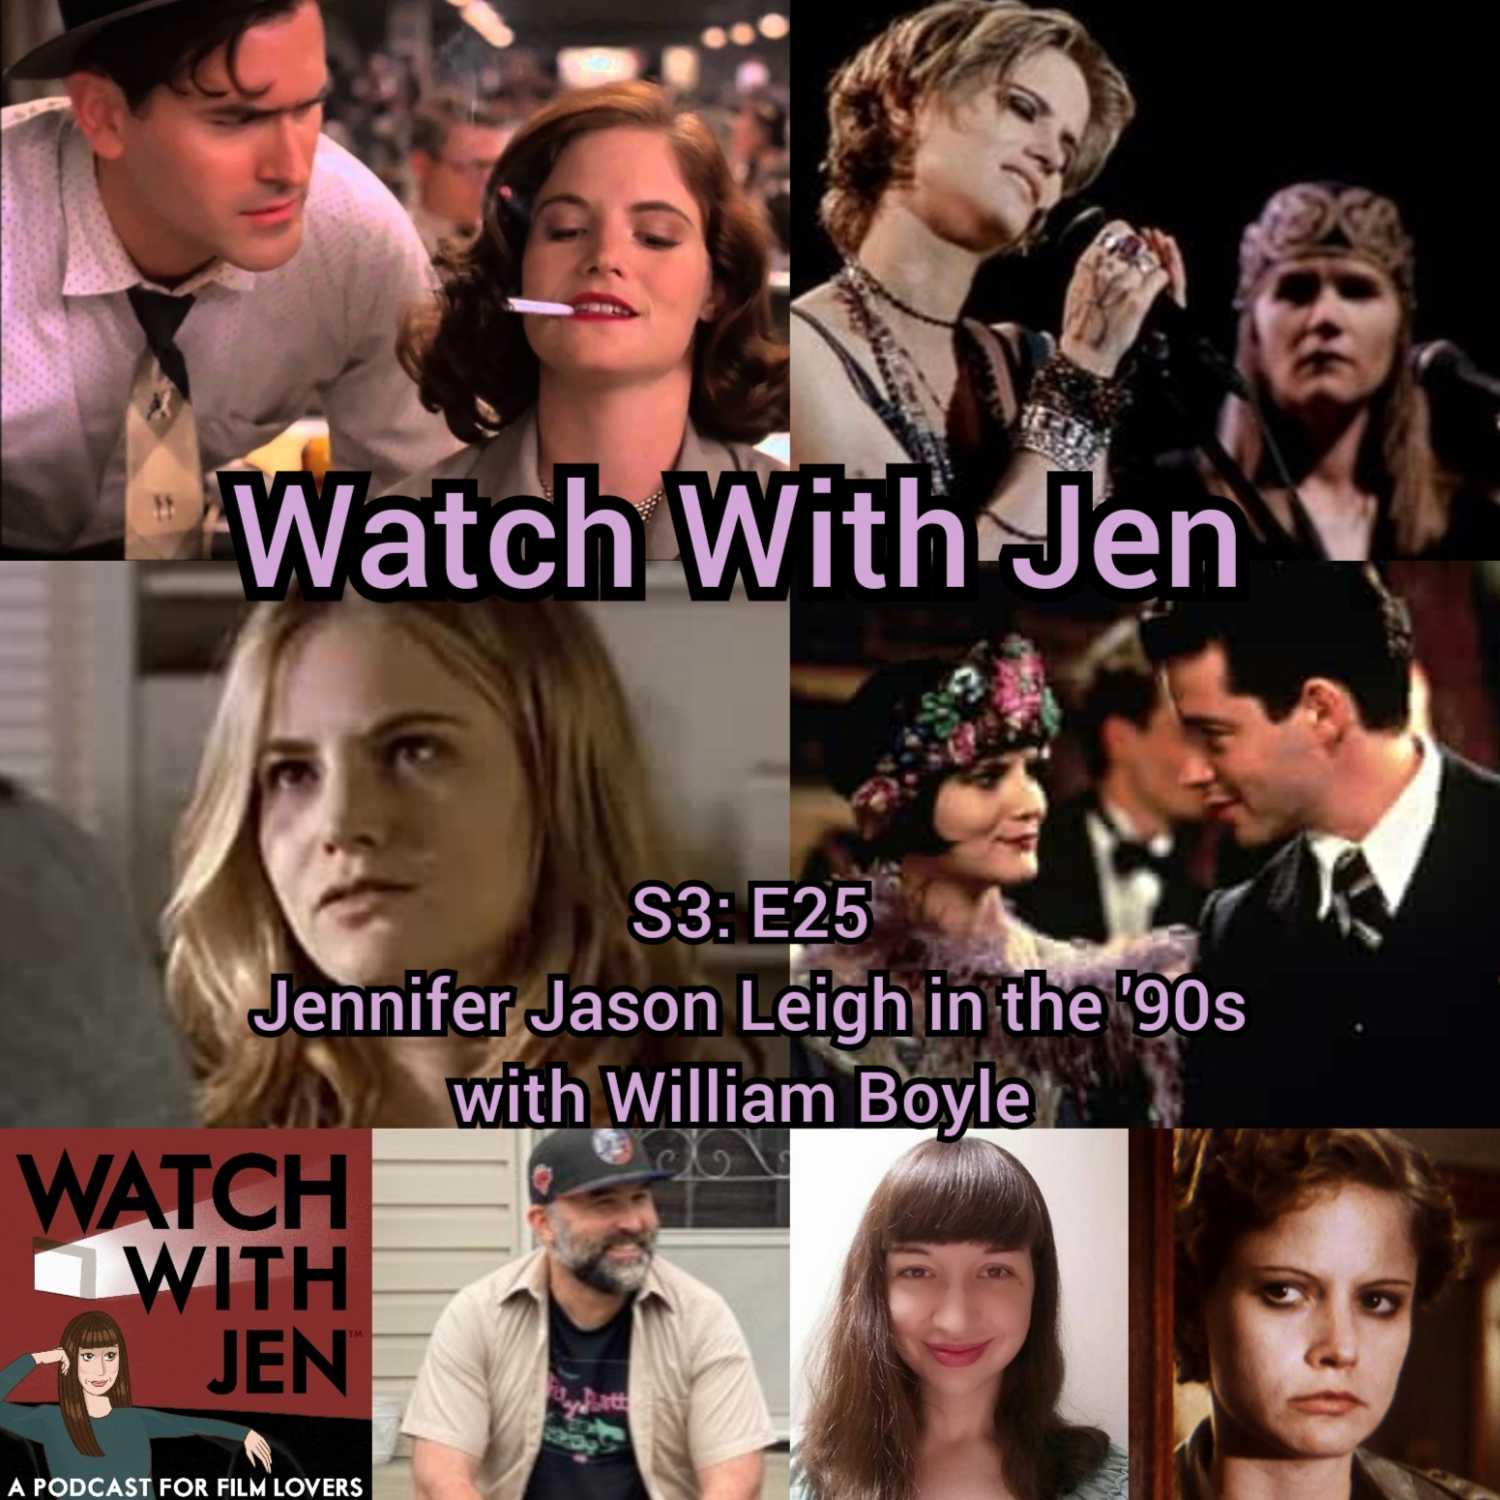 Watch With Jen - S3: E25 - Jennifer Jason Leigh in the ’90s with William Boyle